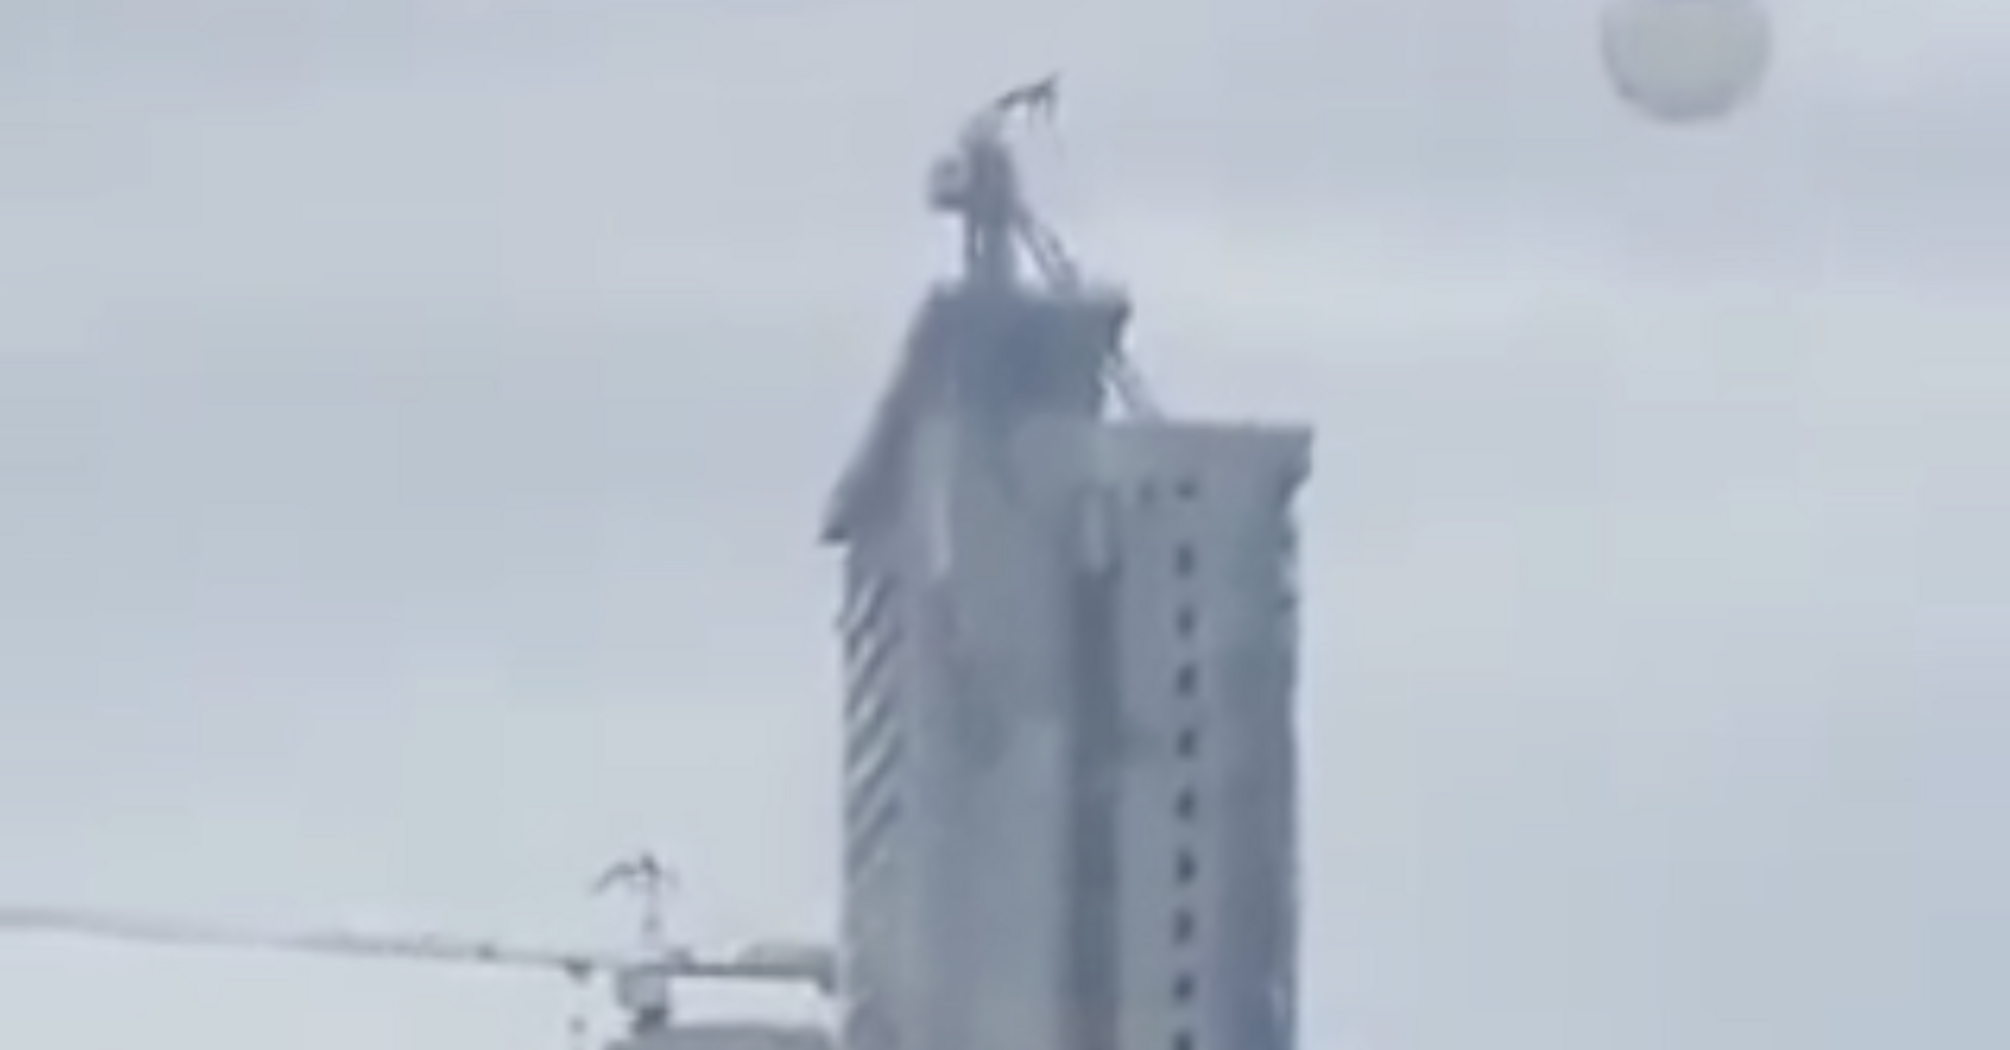 Due to an earthquake in the Philippines, a crane collapsed from the roof of a multi-story building. Video